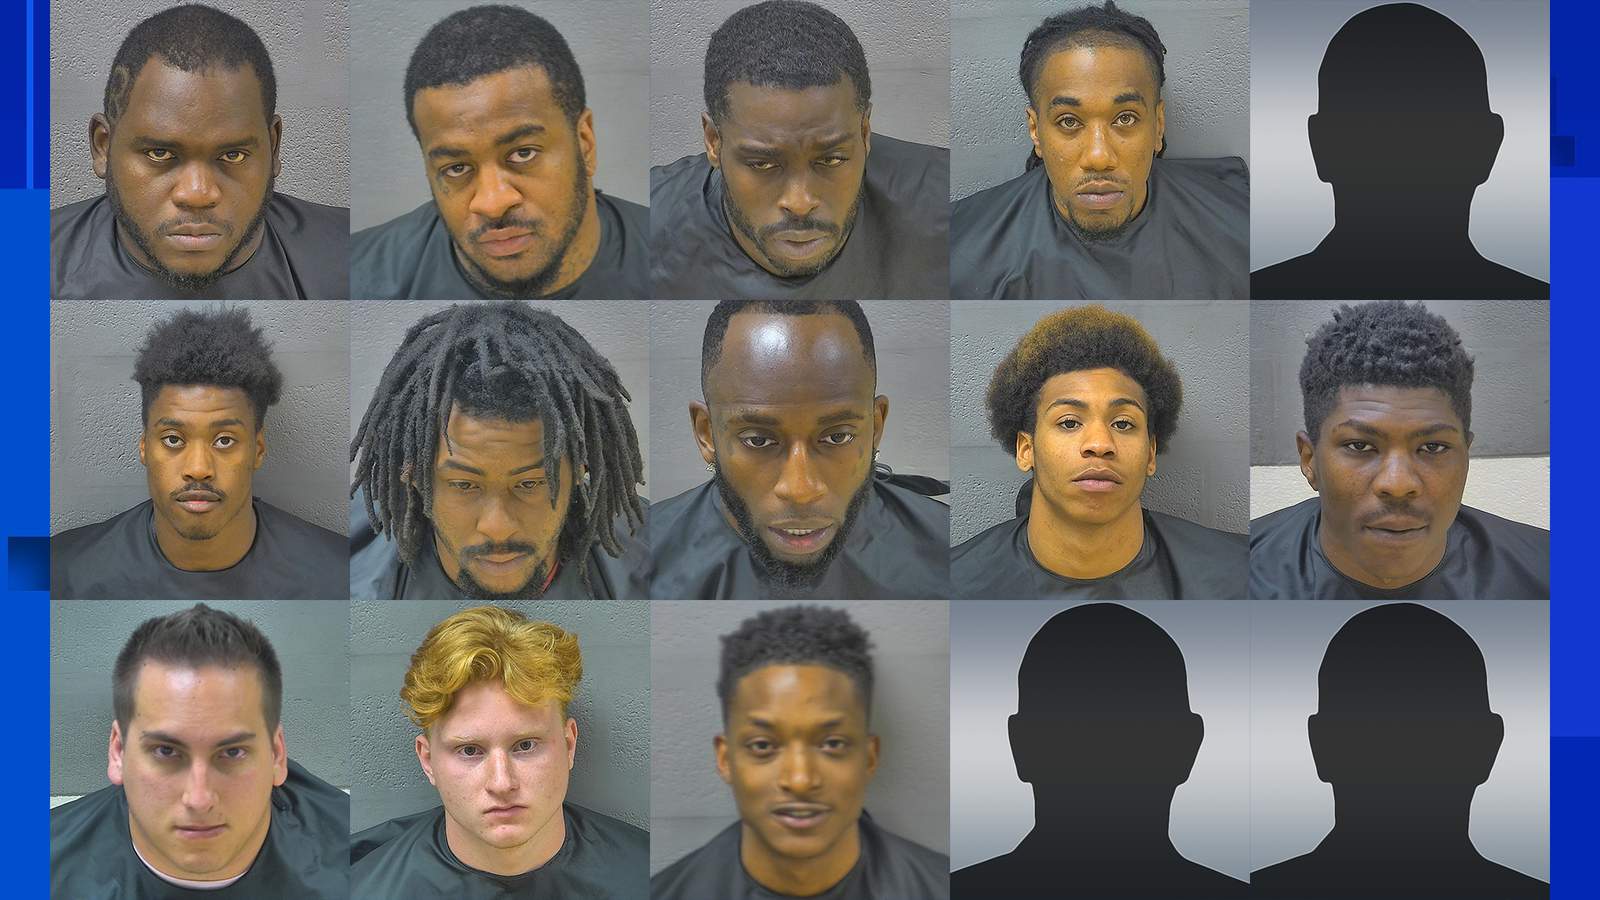 15 arrested in connection with two days of riots, protests in Lynchburg